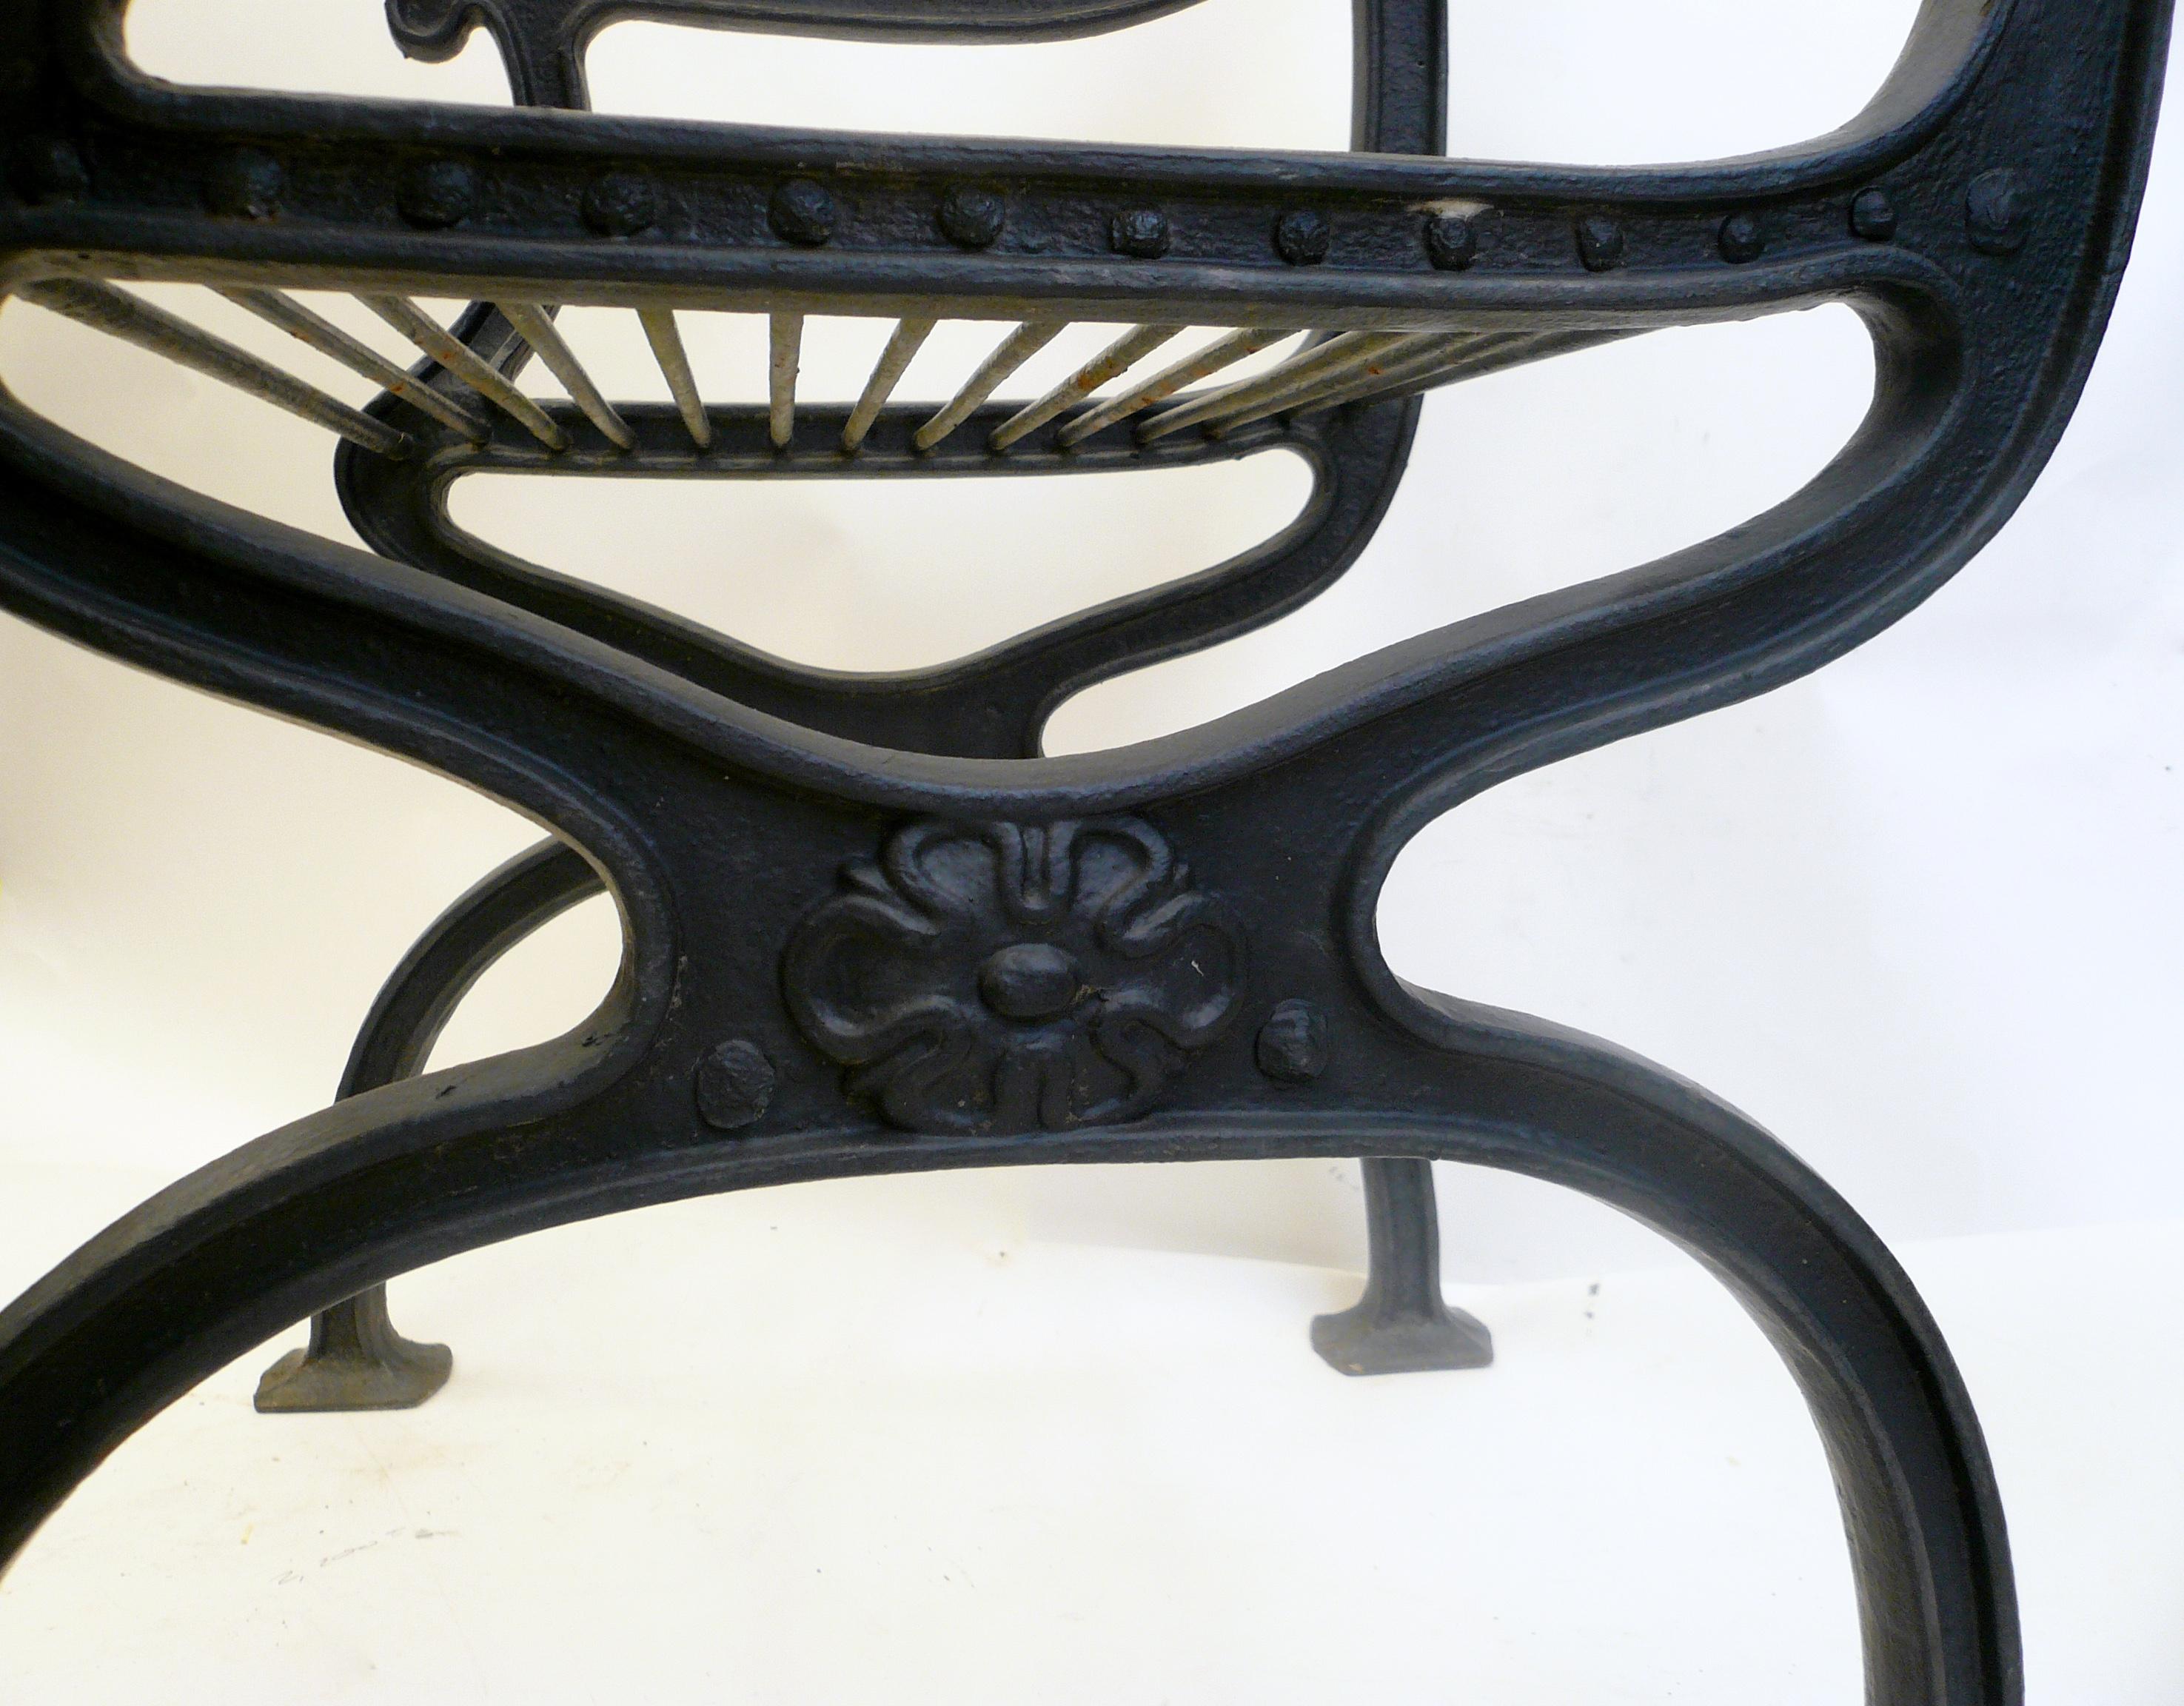 American Set of Four Early 20th Century Cast Iron Garden Chairs by W. A. Snow, Boston